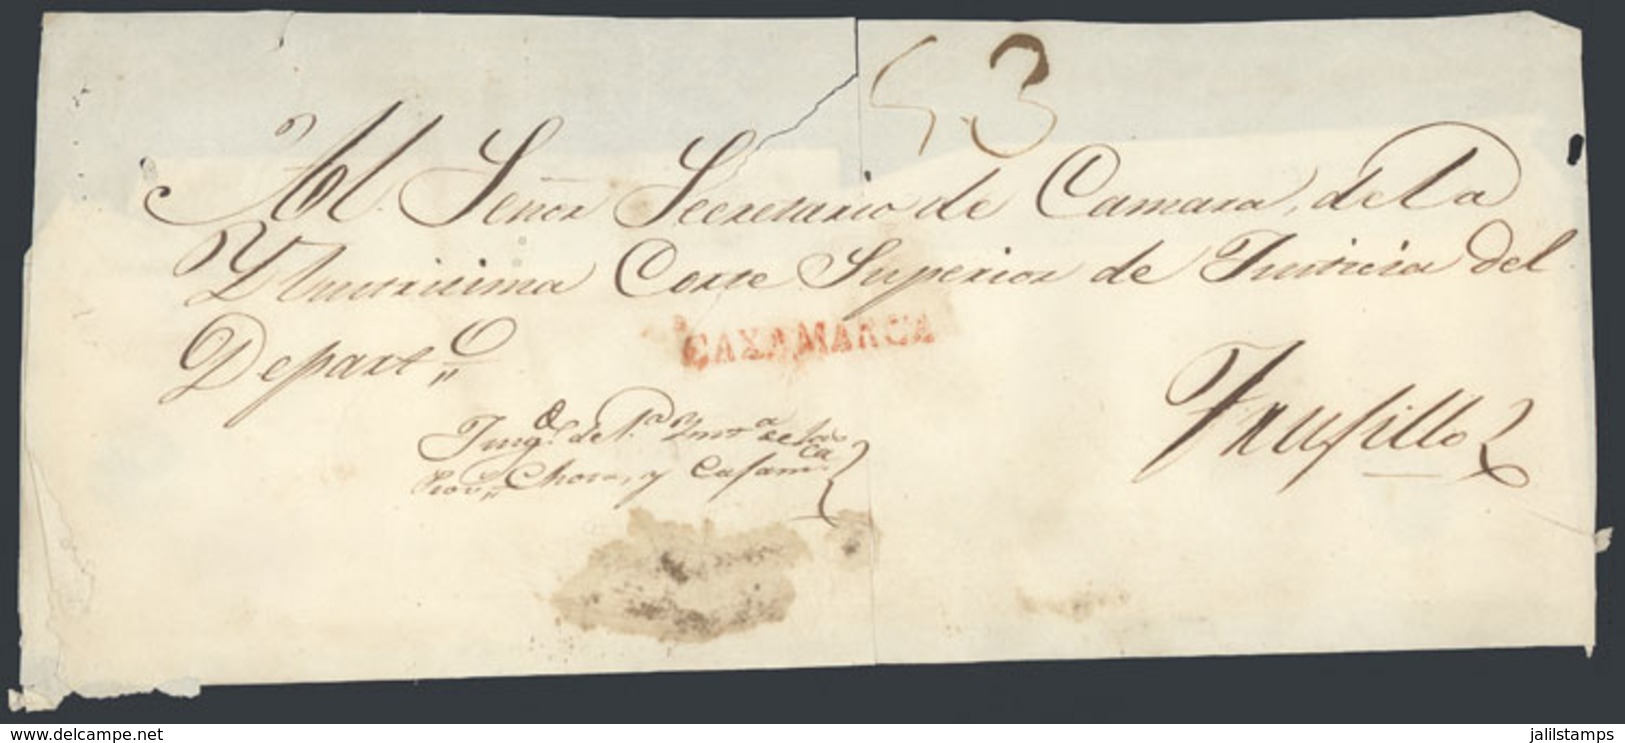 PERU: Official Folded Cover Sent To Trujillo In 1843, With Straightline Red CAXAMARCA Mark Very Well Applied, Minor Defe - Peru